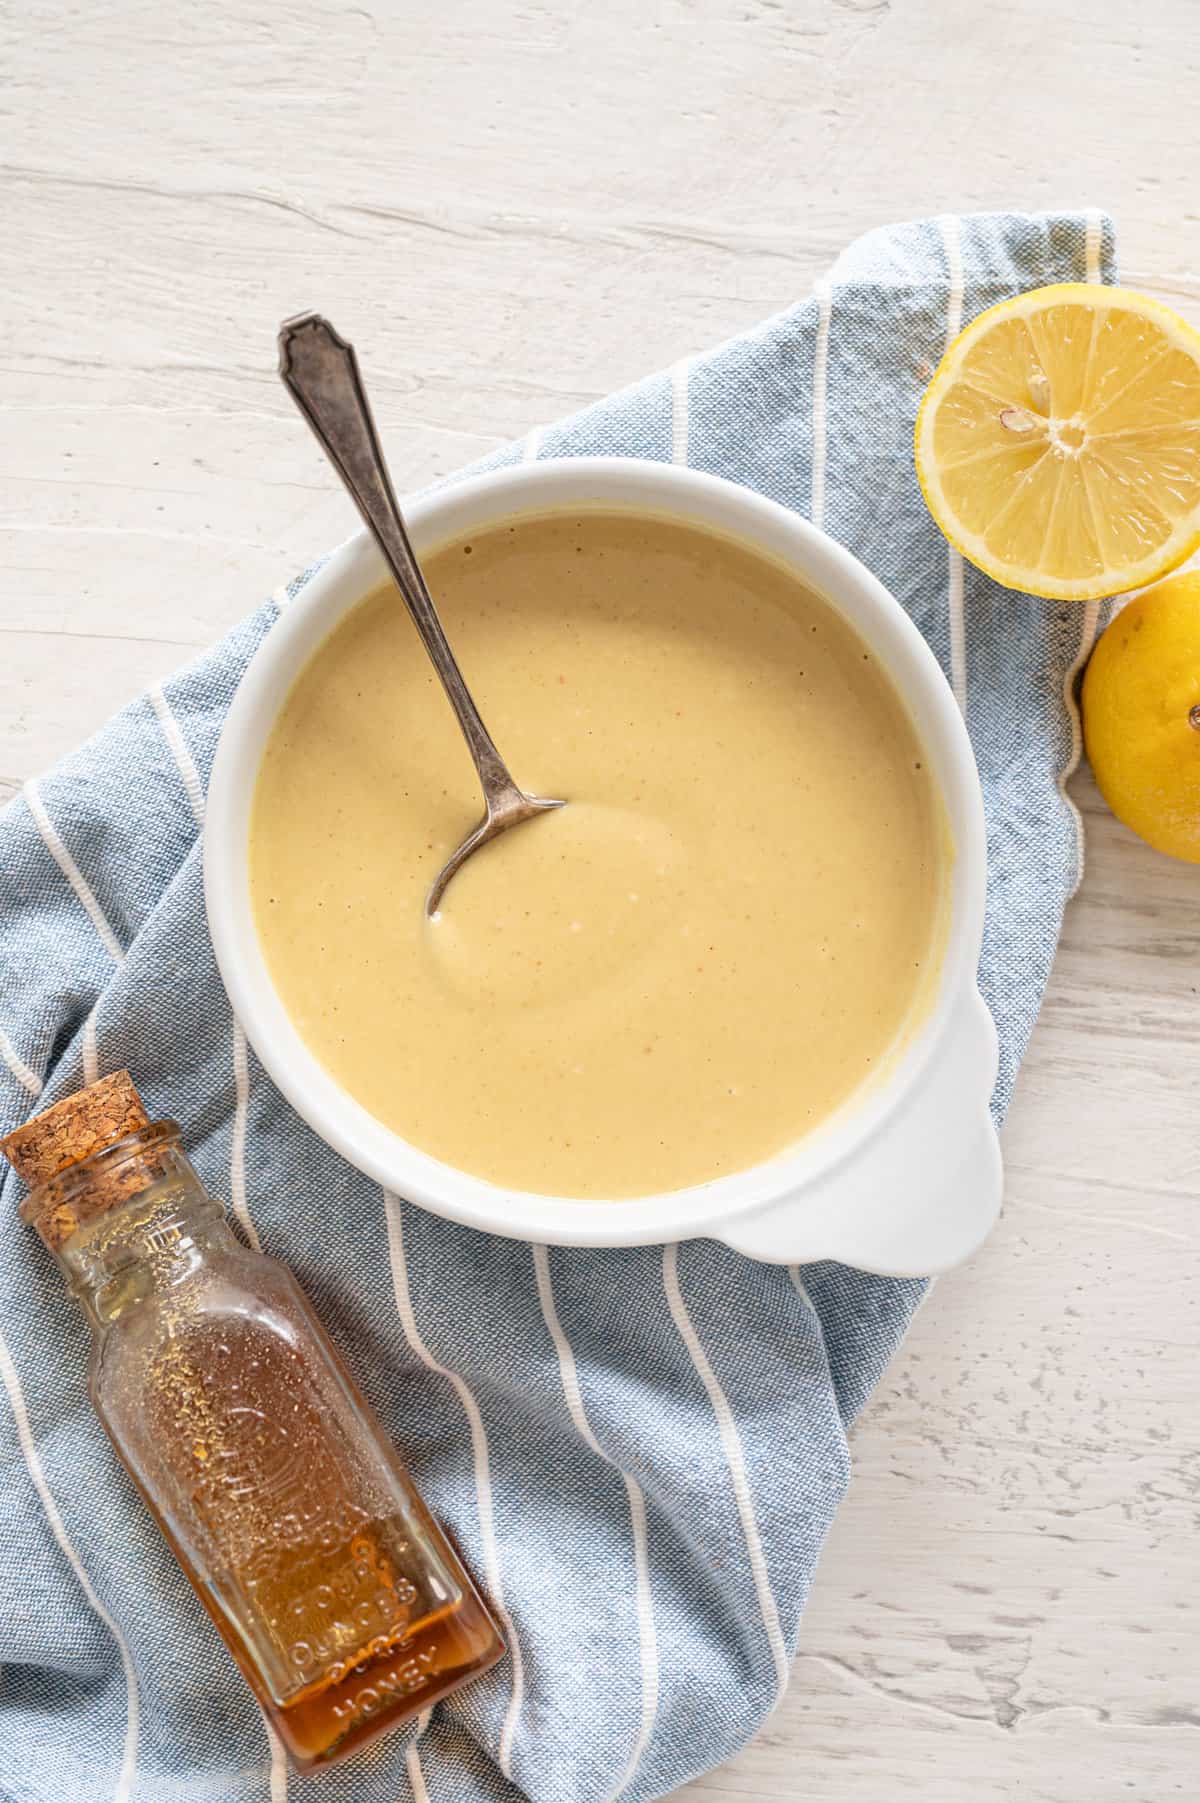 Honey mustard dipping sauce in bowl with spoon and lemons on the side.